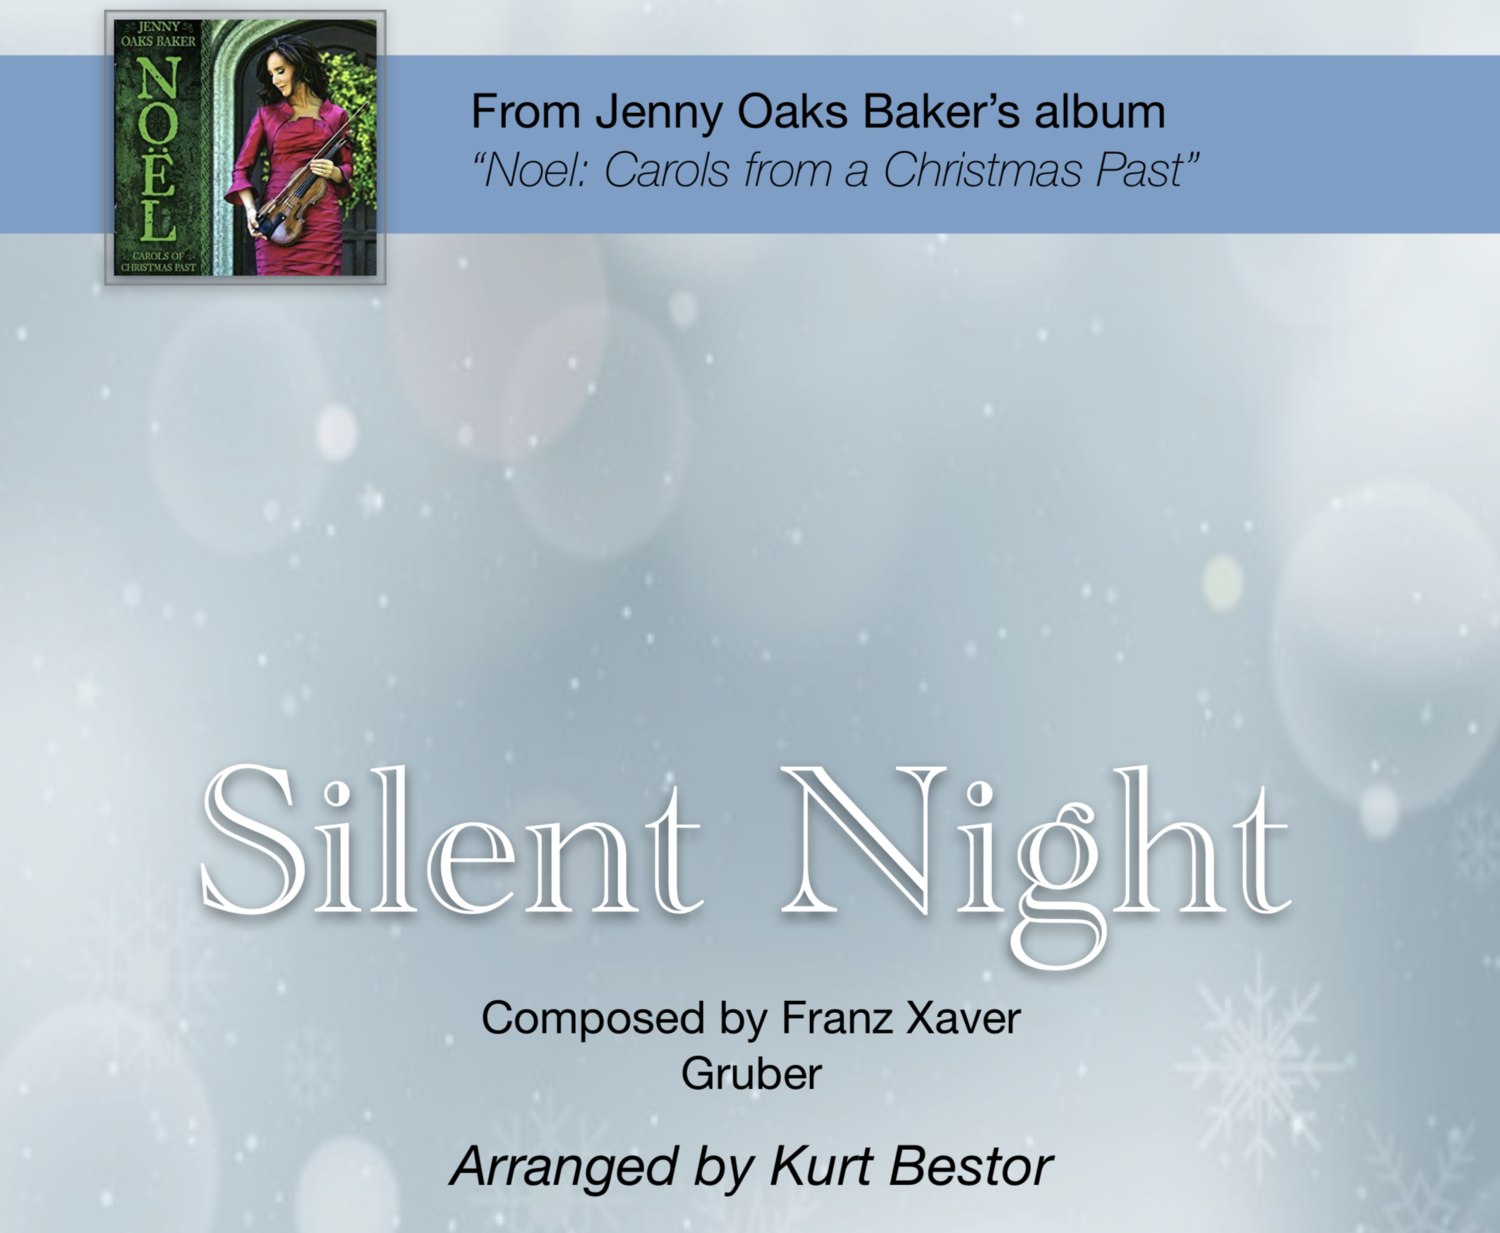 Additional pdf copies can be accessed online for printing separate parts. Silent Night Duet For 2 Violins Or Violin And Voice Violin 1 Original Advanced Violin 2 Beginner Sheet Music Jenny Oaks Baker